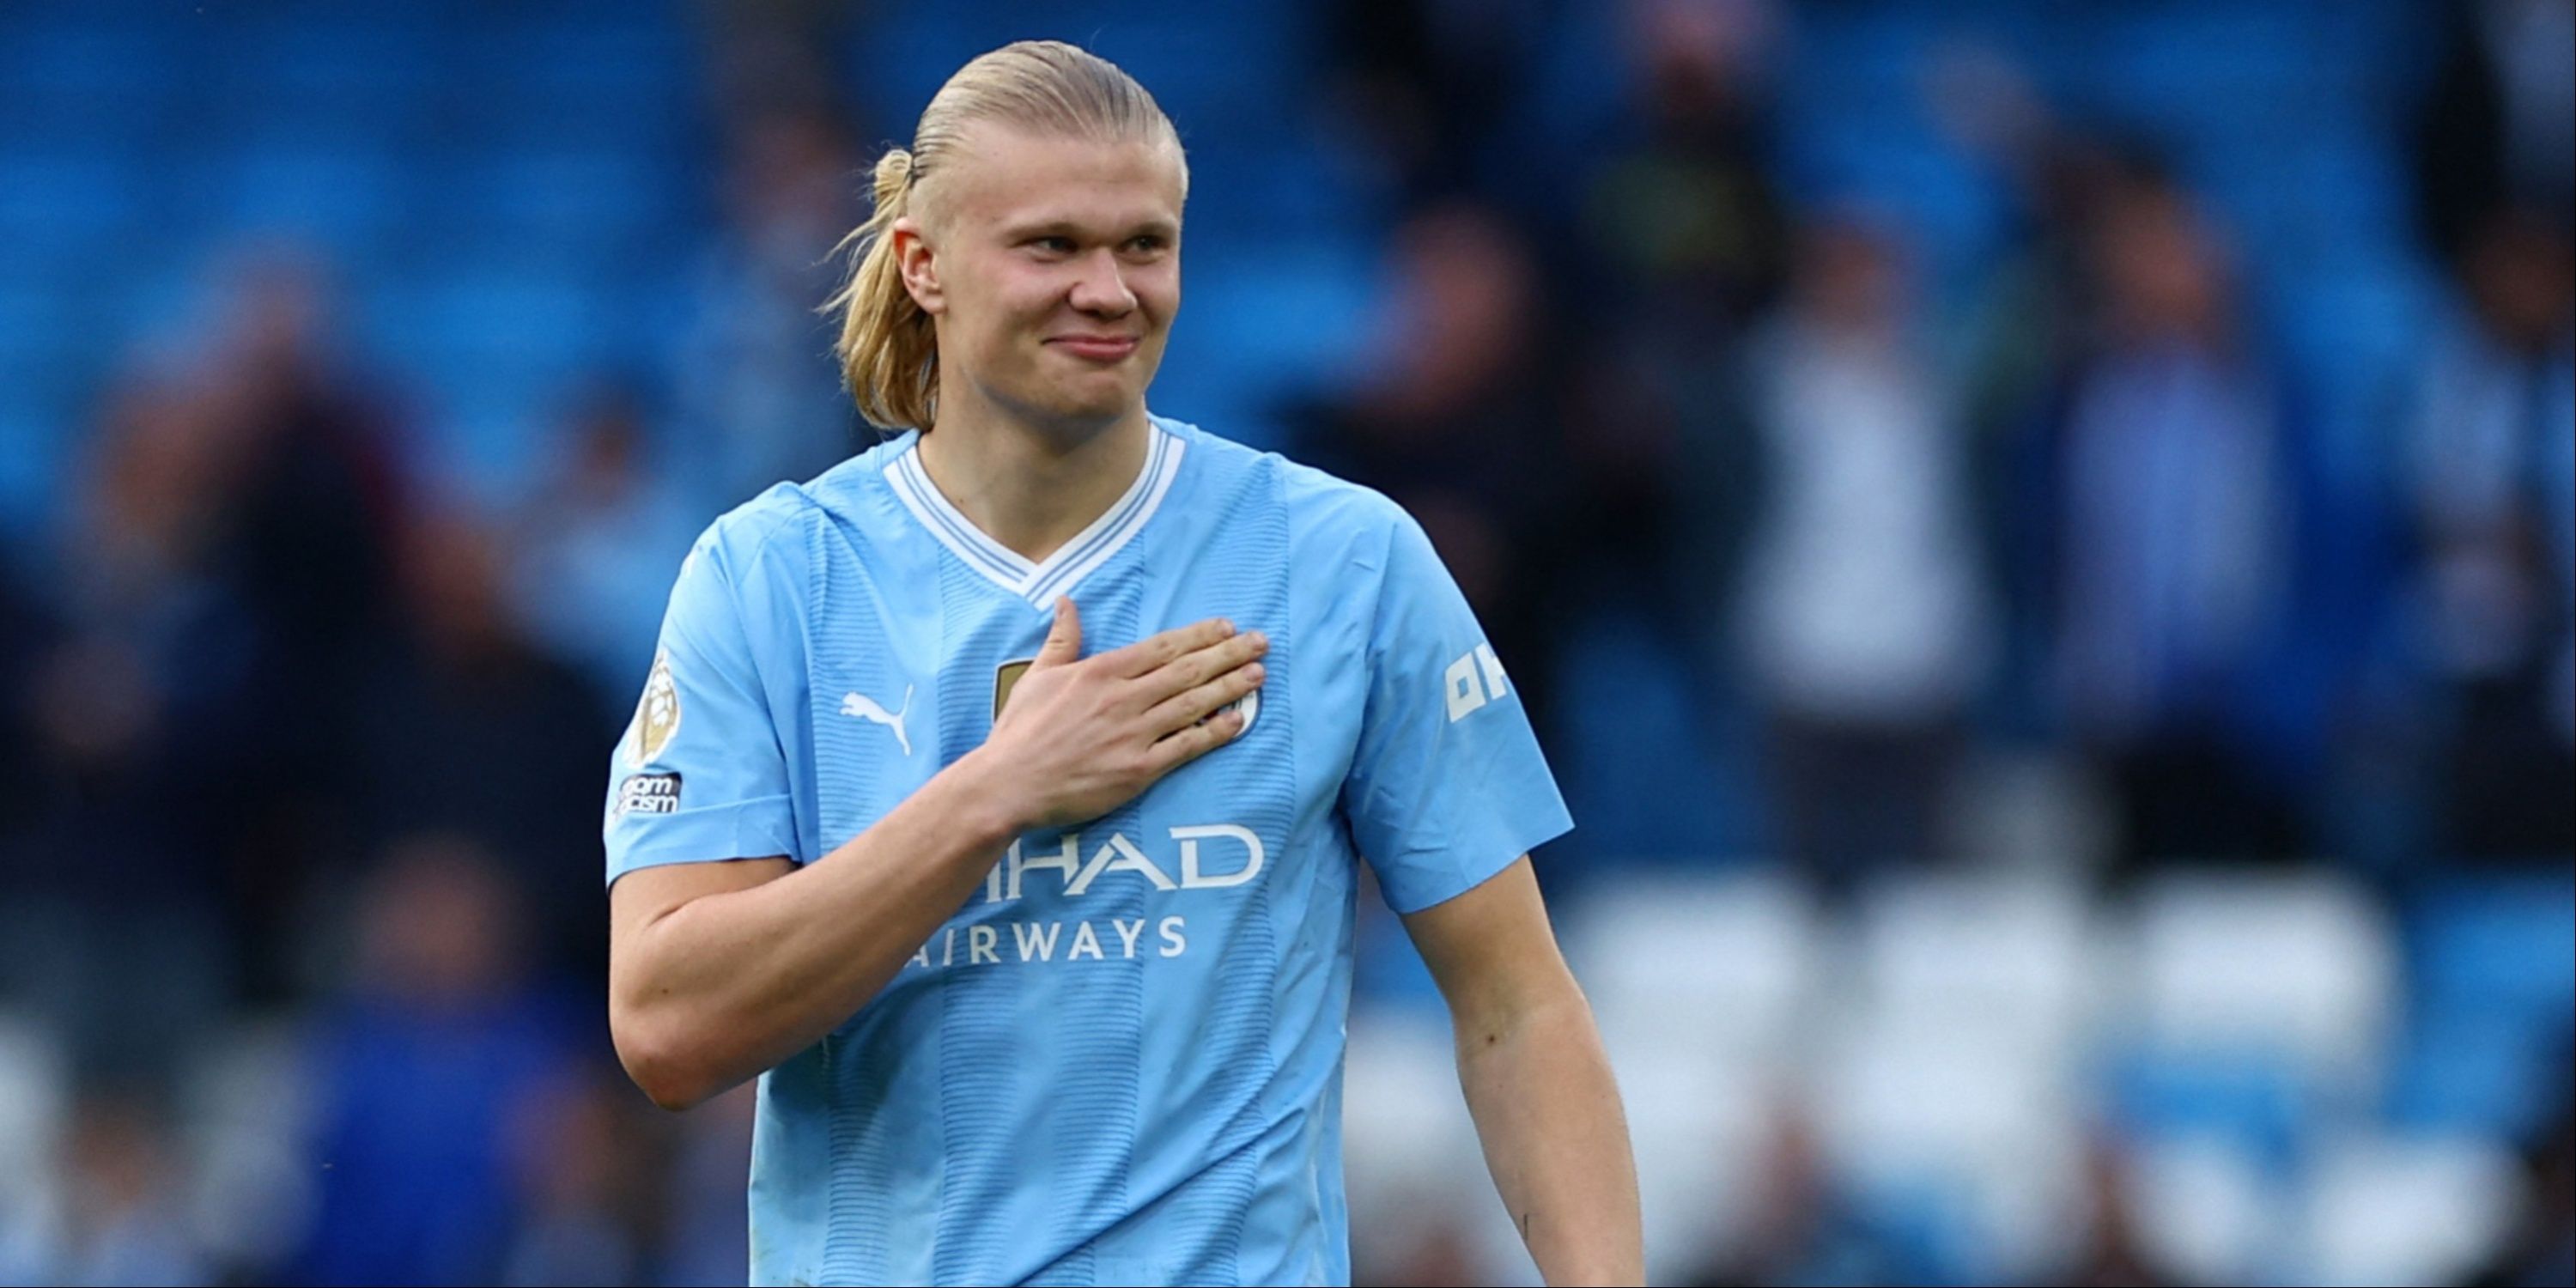 Erling Haaland taps the Manchester City badge on his chest.